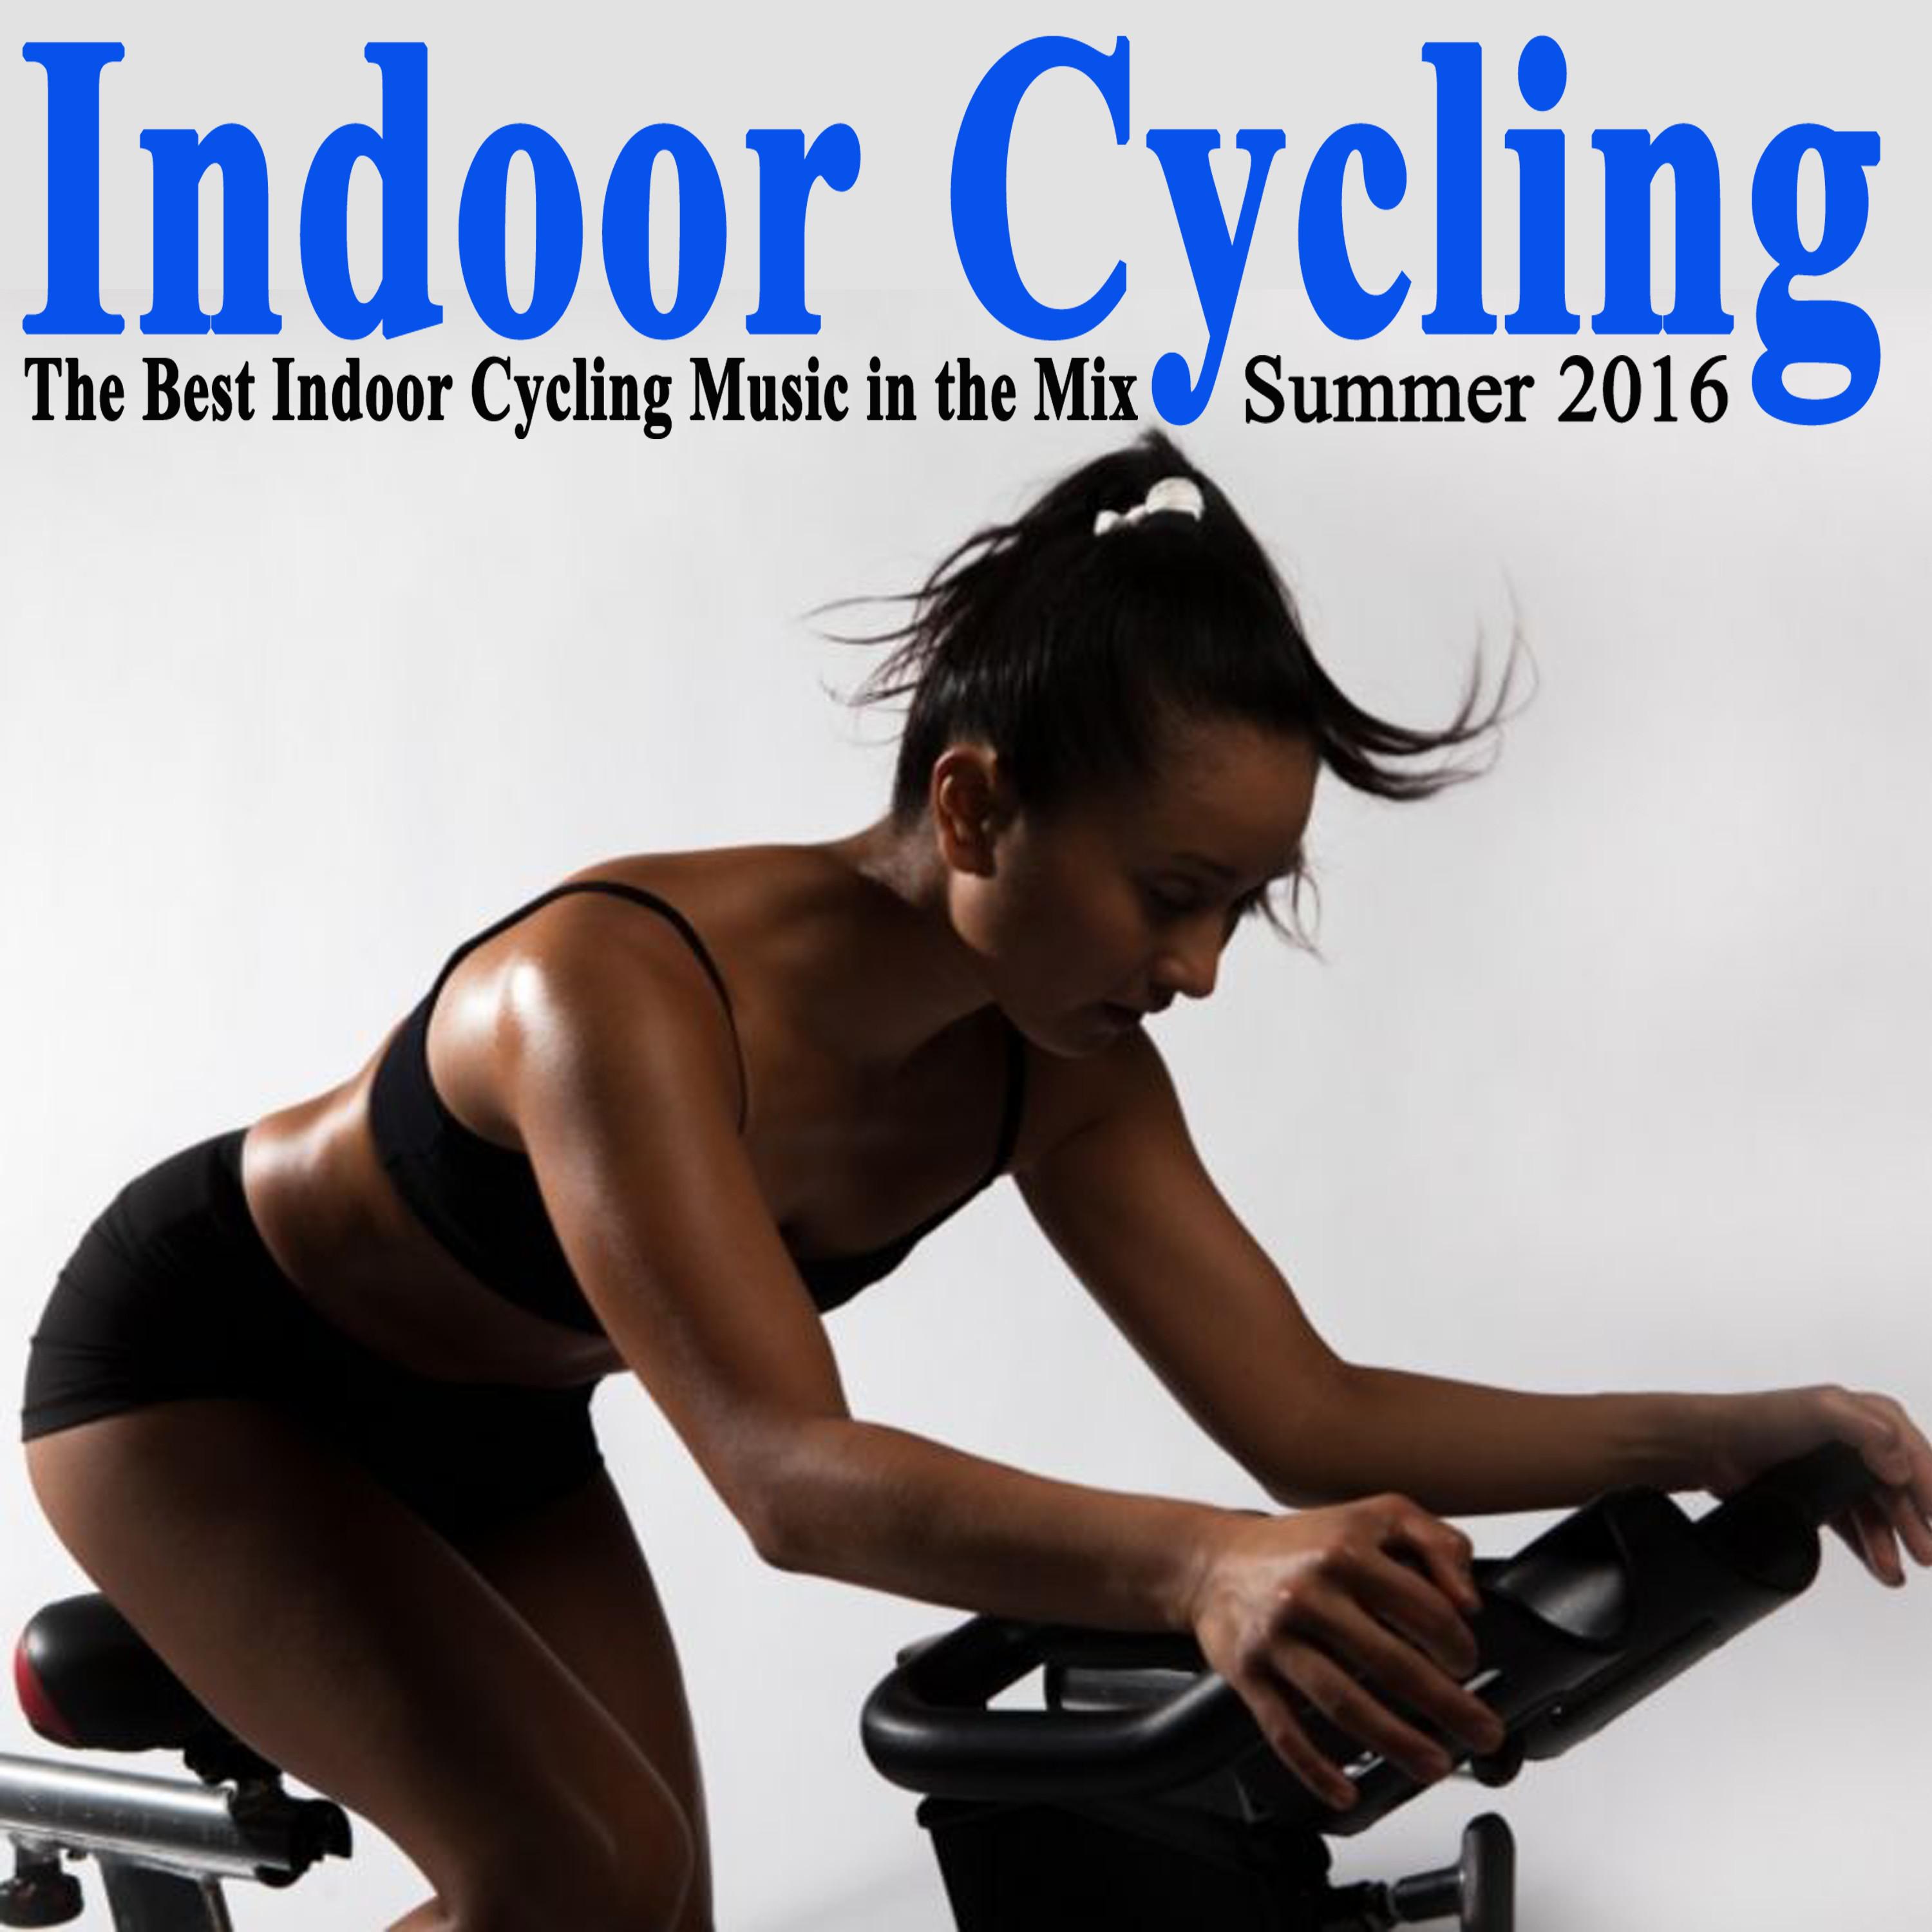 DJ Mix - Indoor Cycling Summer 2016 (The Best Indoor Cycling Music Spinning in the Mix) [Continuous DJ Mix]